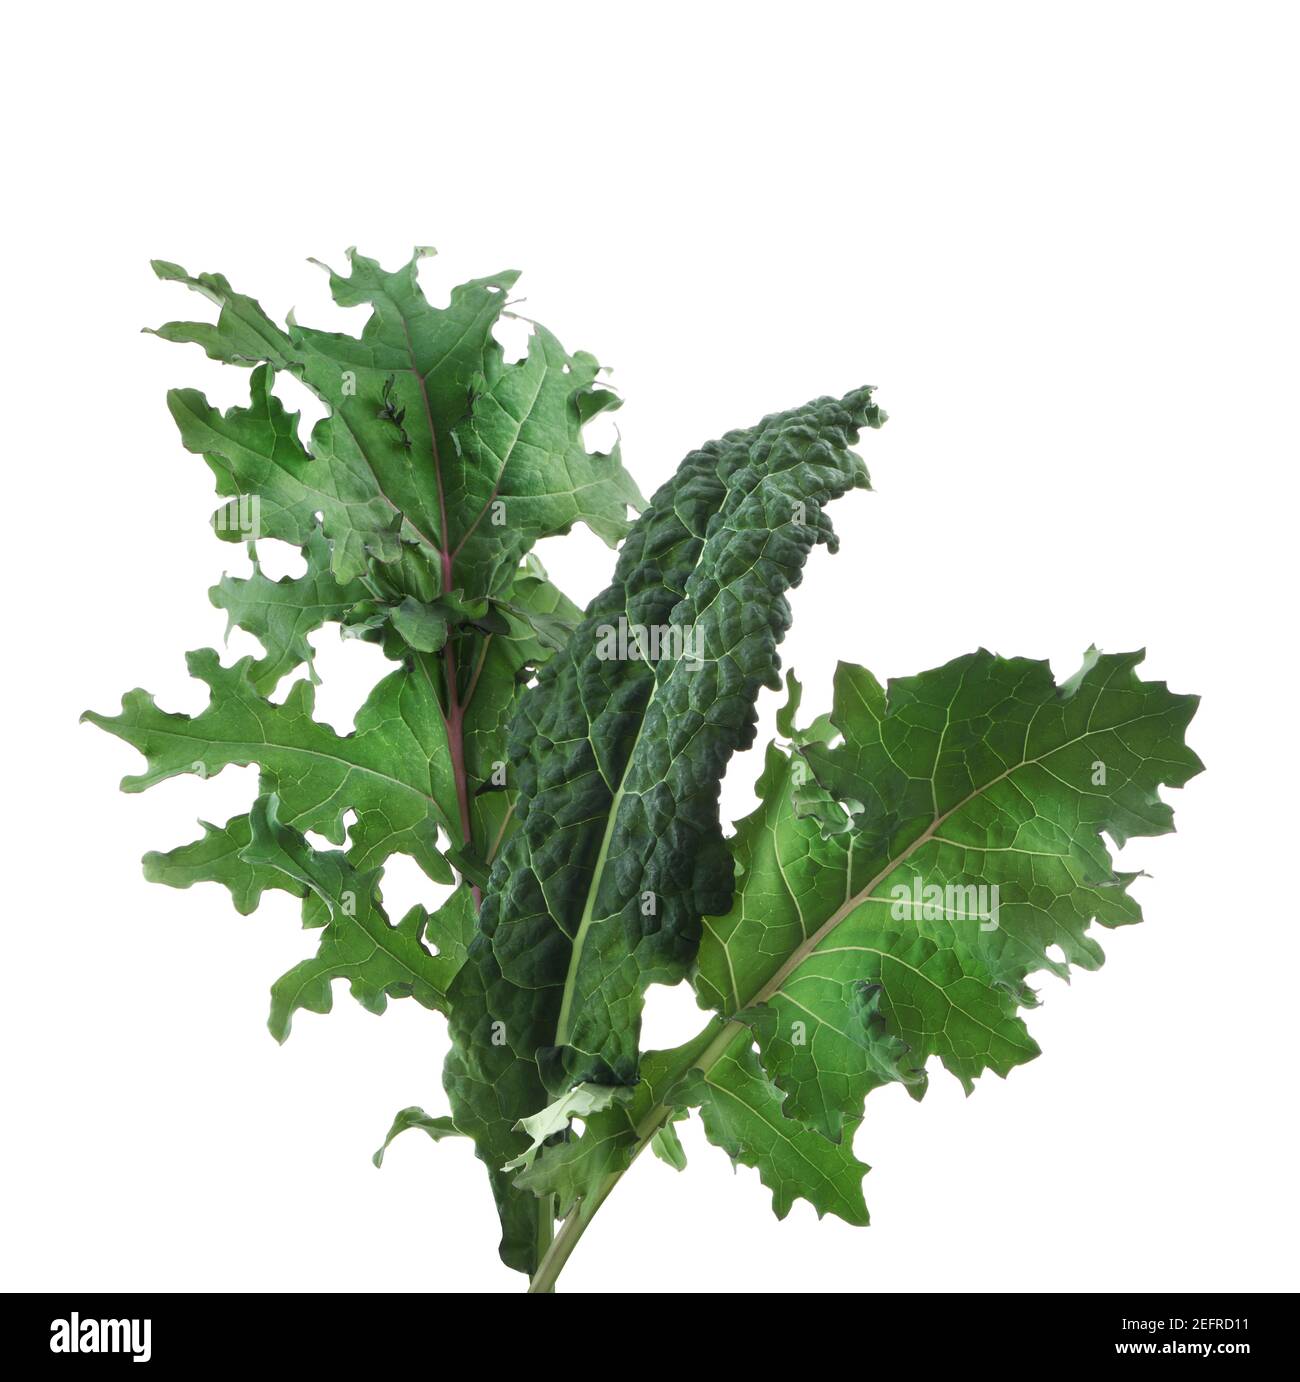 Closeup of Kale, green edible plant leaves. Organically grown Red Russian kale and Dinosaur or Lacinato kale, Cavolo nero, Tuscan or Italian kale. Thr Stock Photo